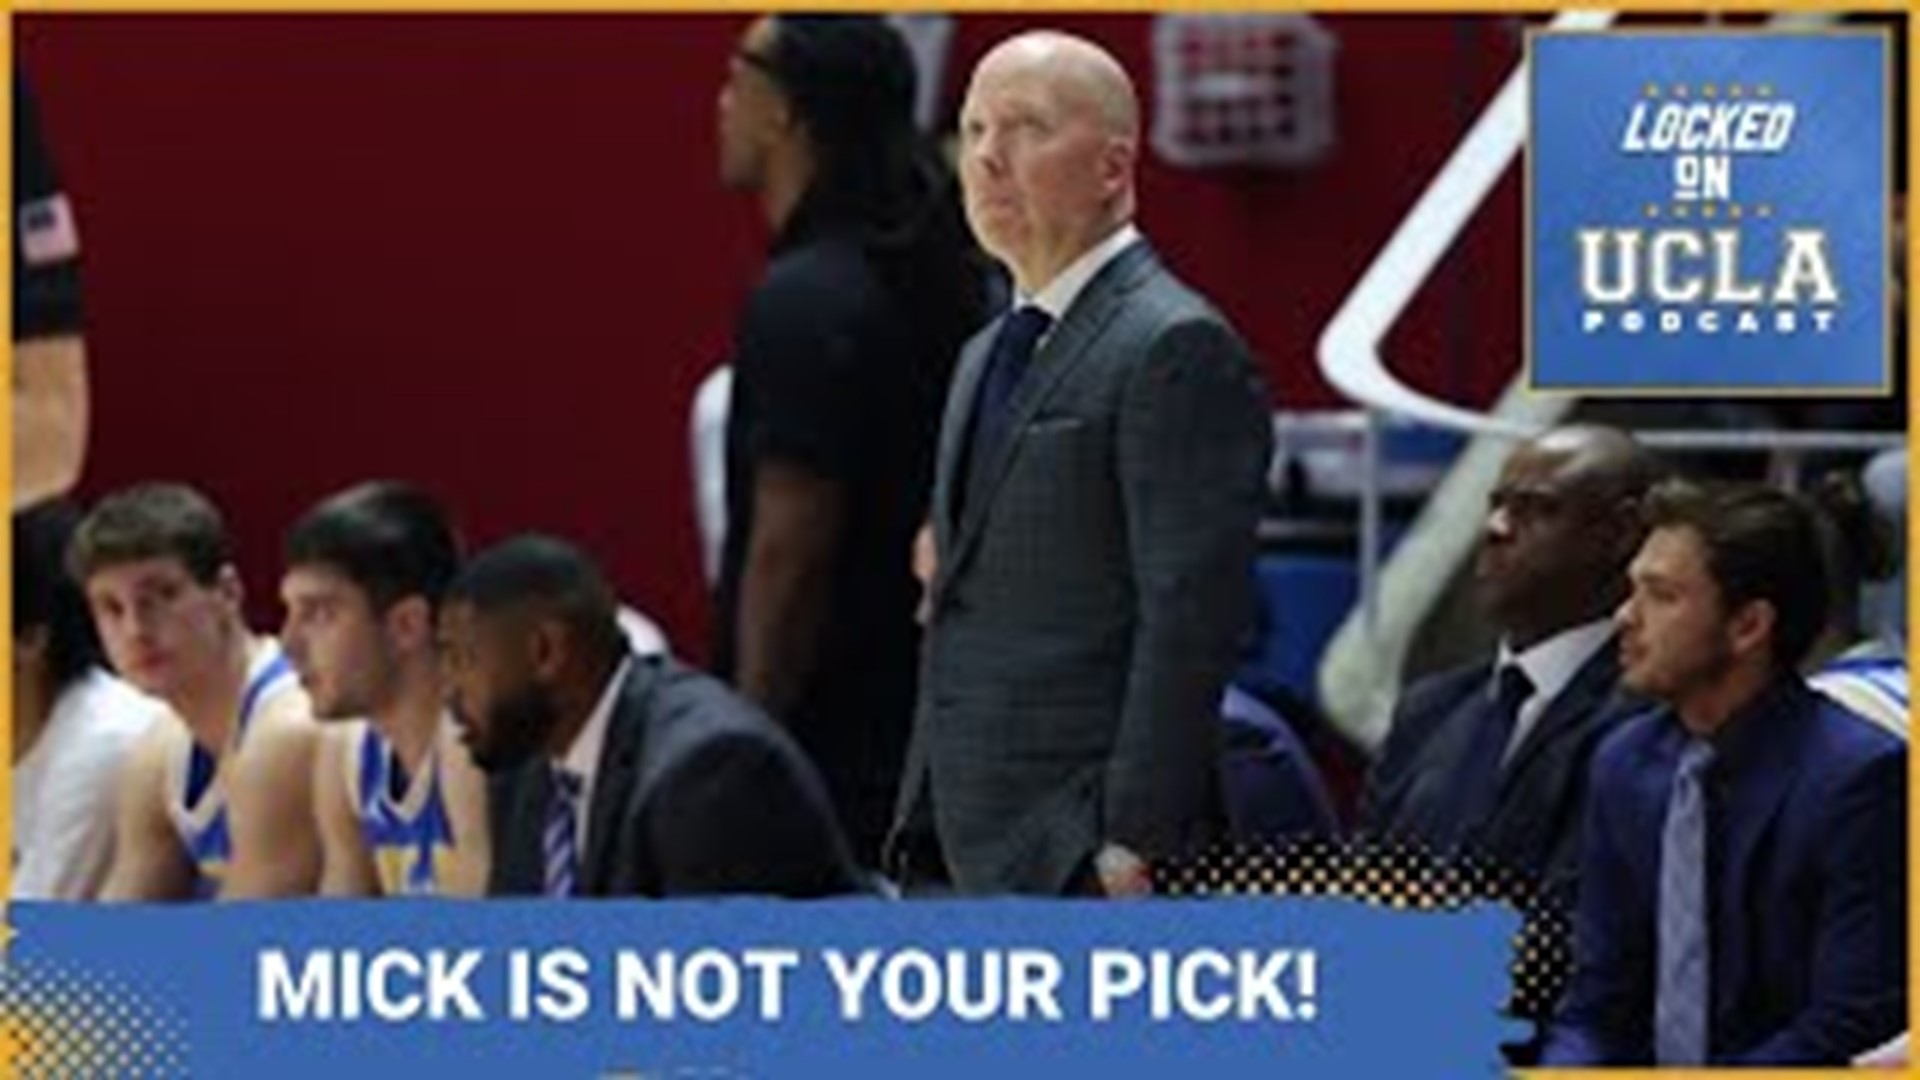 On this episode of Locked On UCLA, Zach Anderson-Yoxsimer discusses the Mick Cronin to Louisville rumors, the transfer portal, and UCLA WBB's chances for a title.